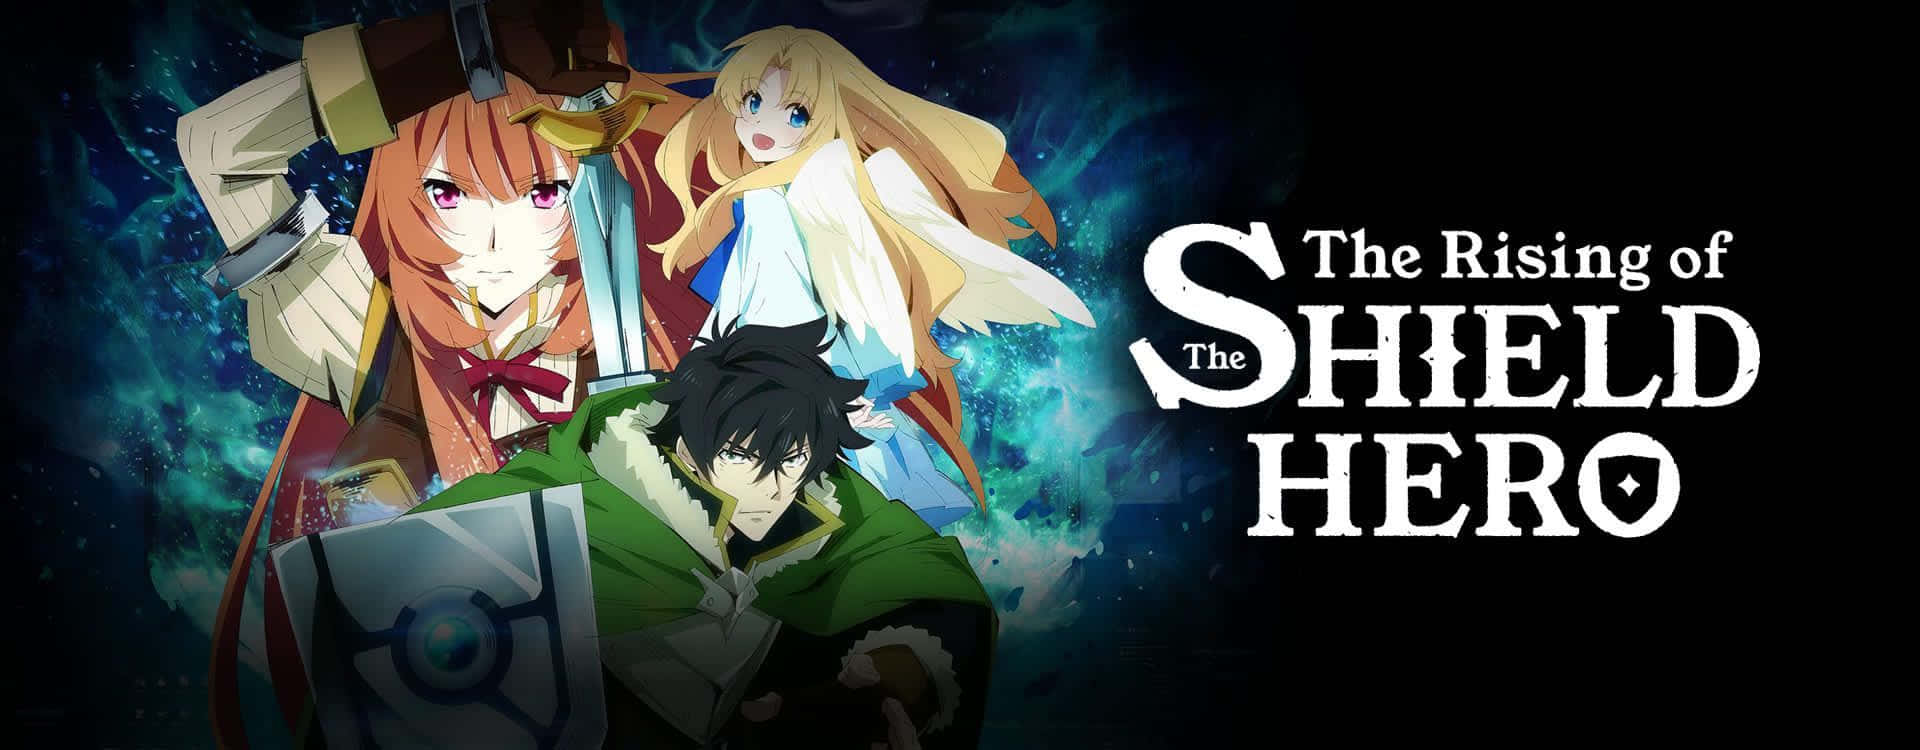 The heroes strike a formidable pose in The Rising of the Shield Hero backdrop